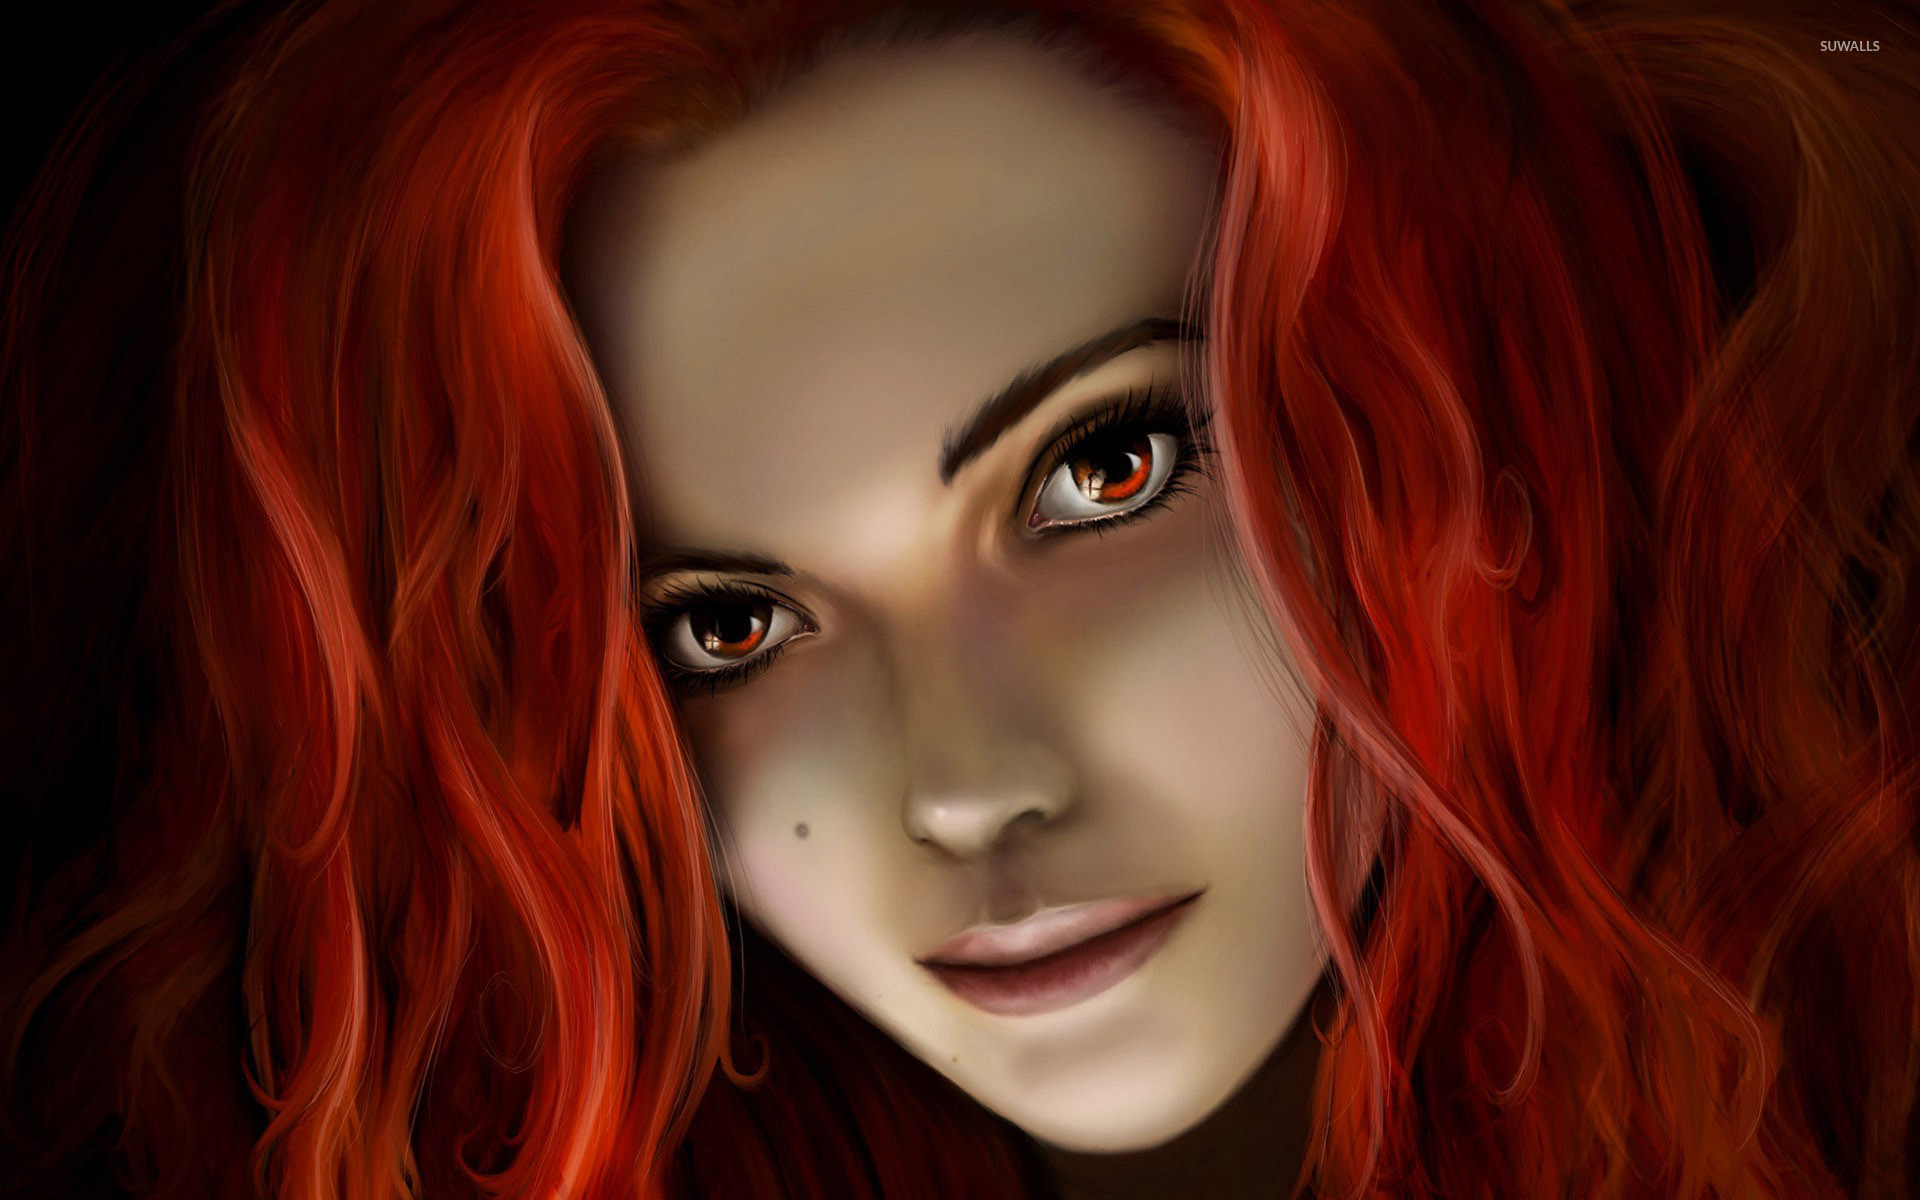 1920x1200 Fire Tears Wallpaper Digital Art Wallpapers Red Haired Girl  Jpg.  home remodeling software free ...